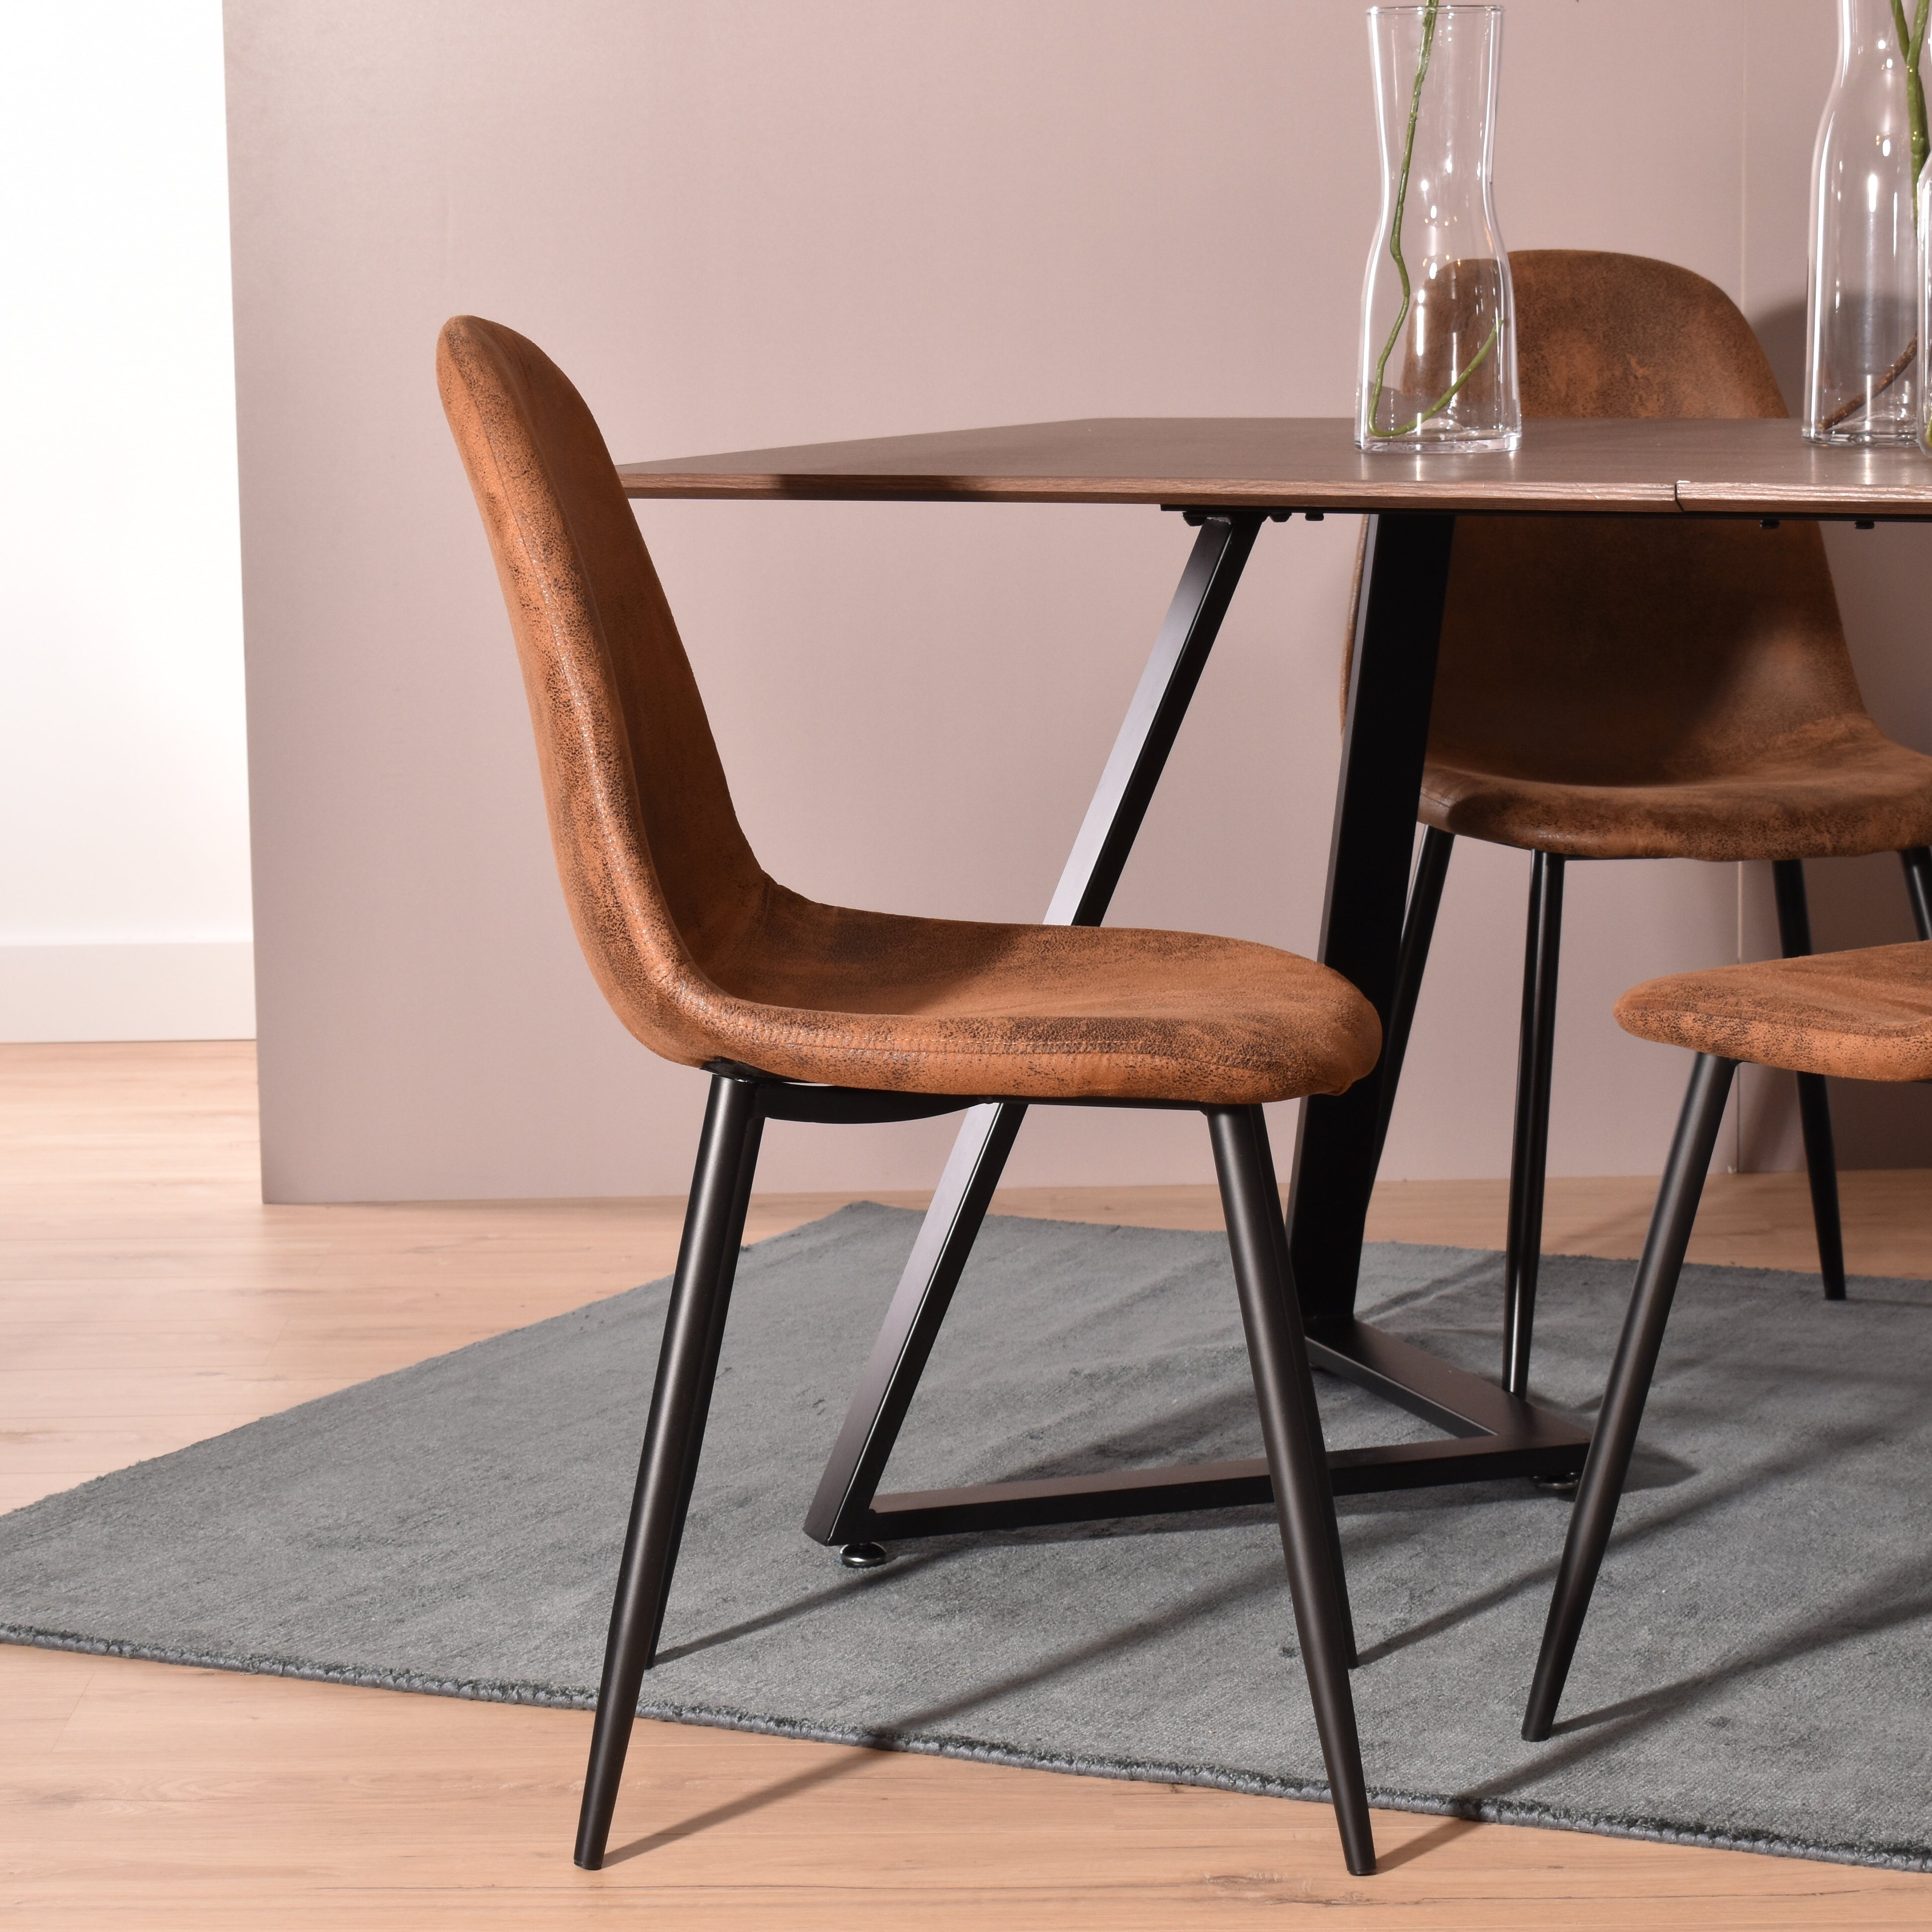 ROYAL dining table set + set of 6 CHARLTON SUEDE BROWN chairs